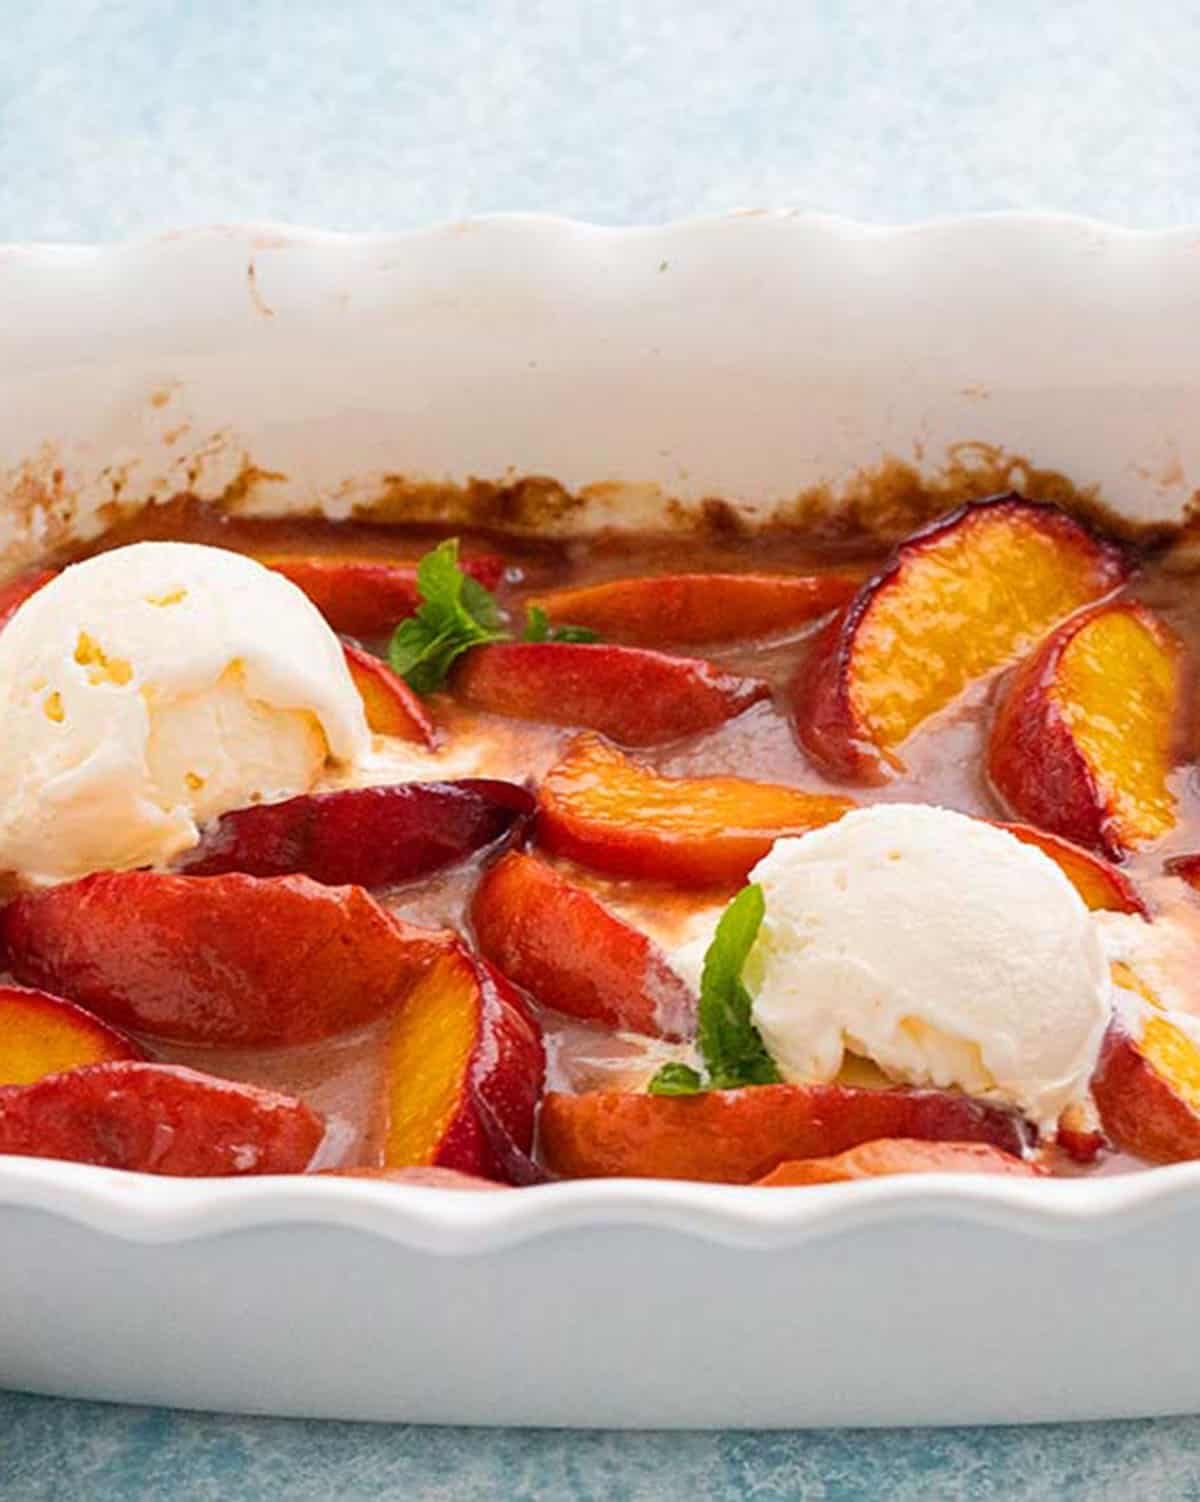 baked peaches topped with two scoops of white ice cream in a white dish.